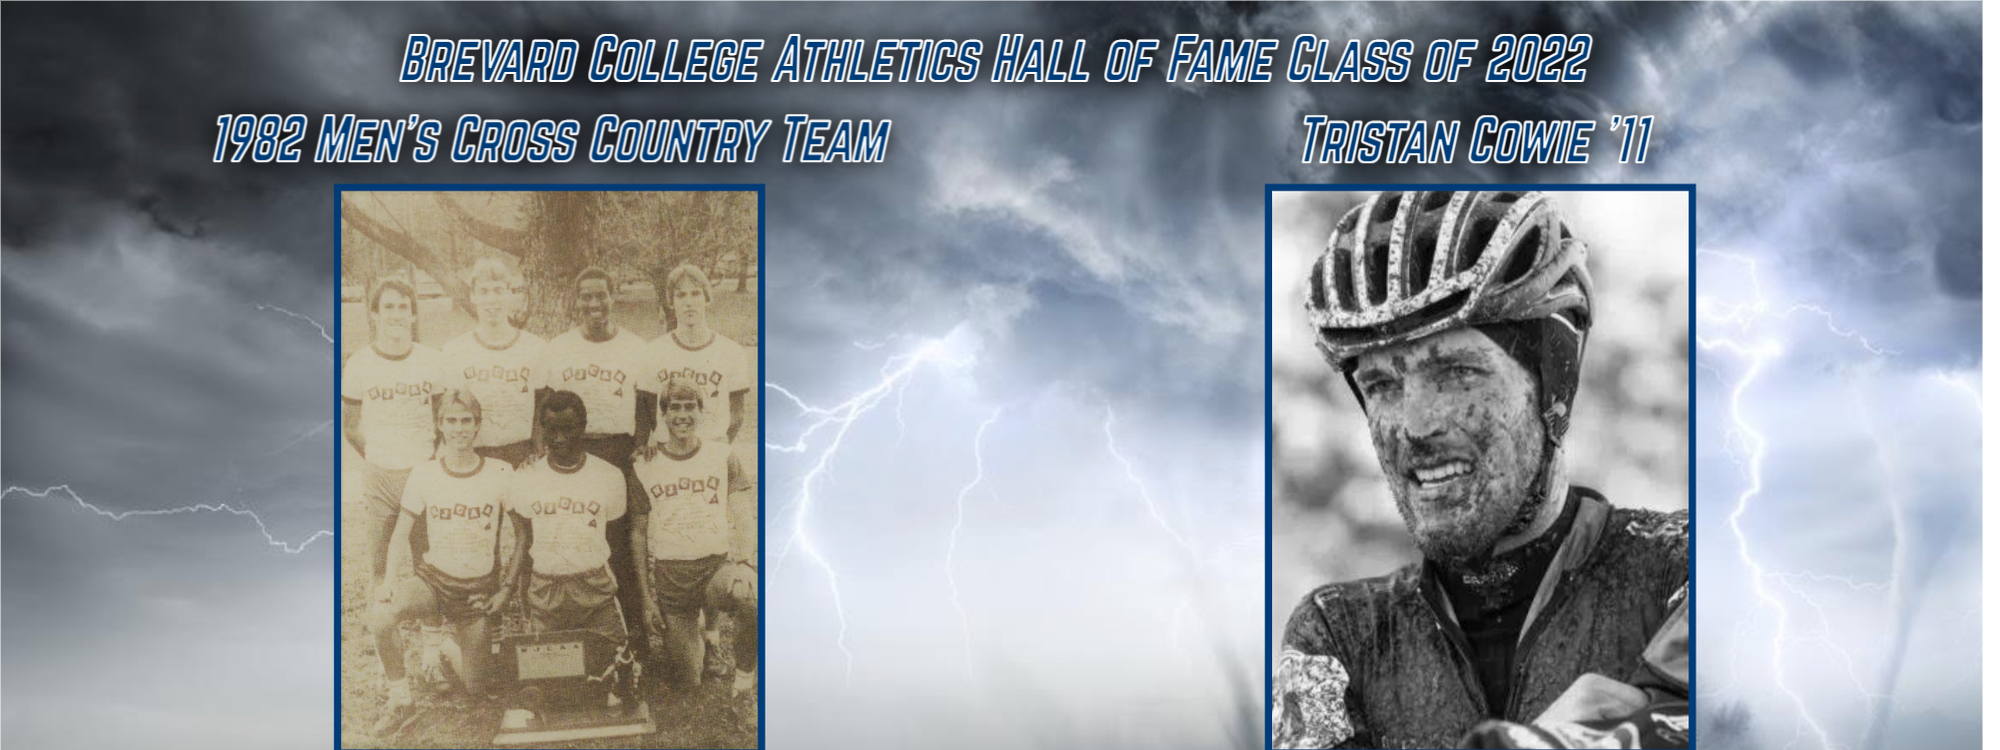 Brevard College Athletics Hall of Fame Class of 2022 Announced